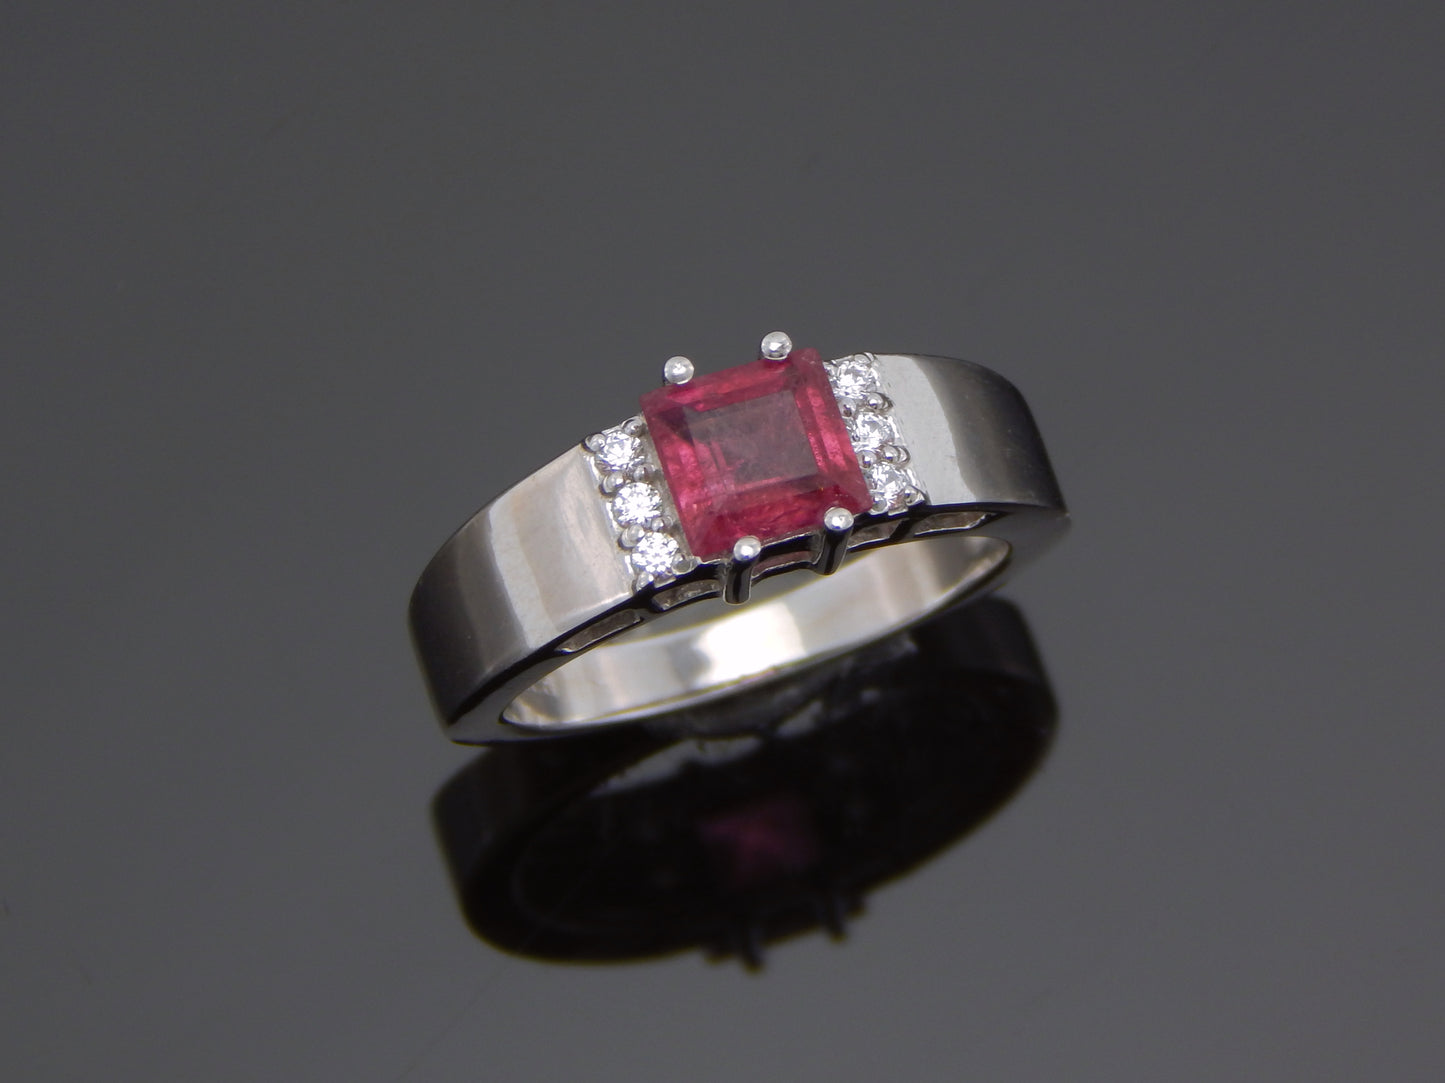 Genuine Tourmaline Cushion Cut Ring in 925 Sterling Silver